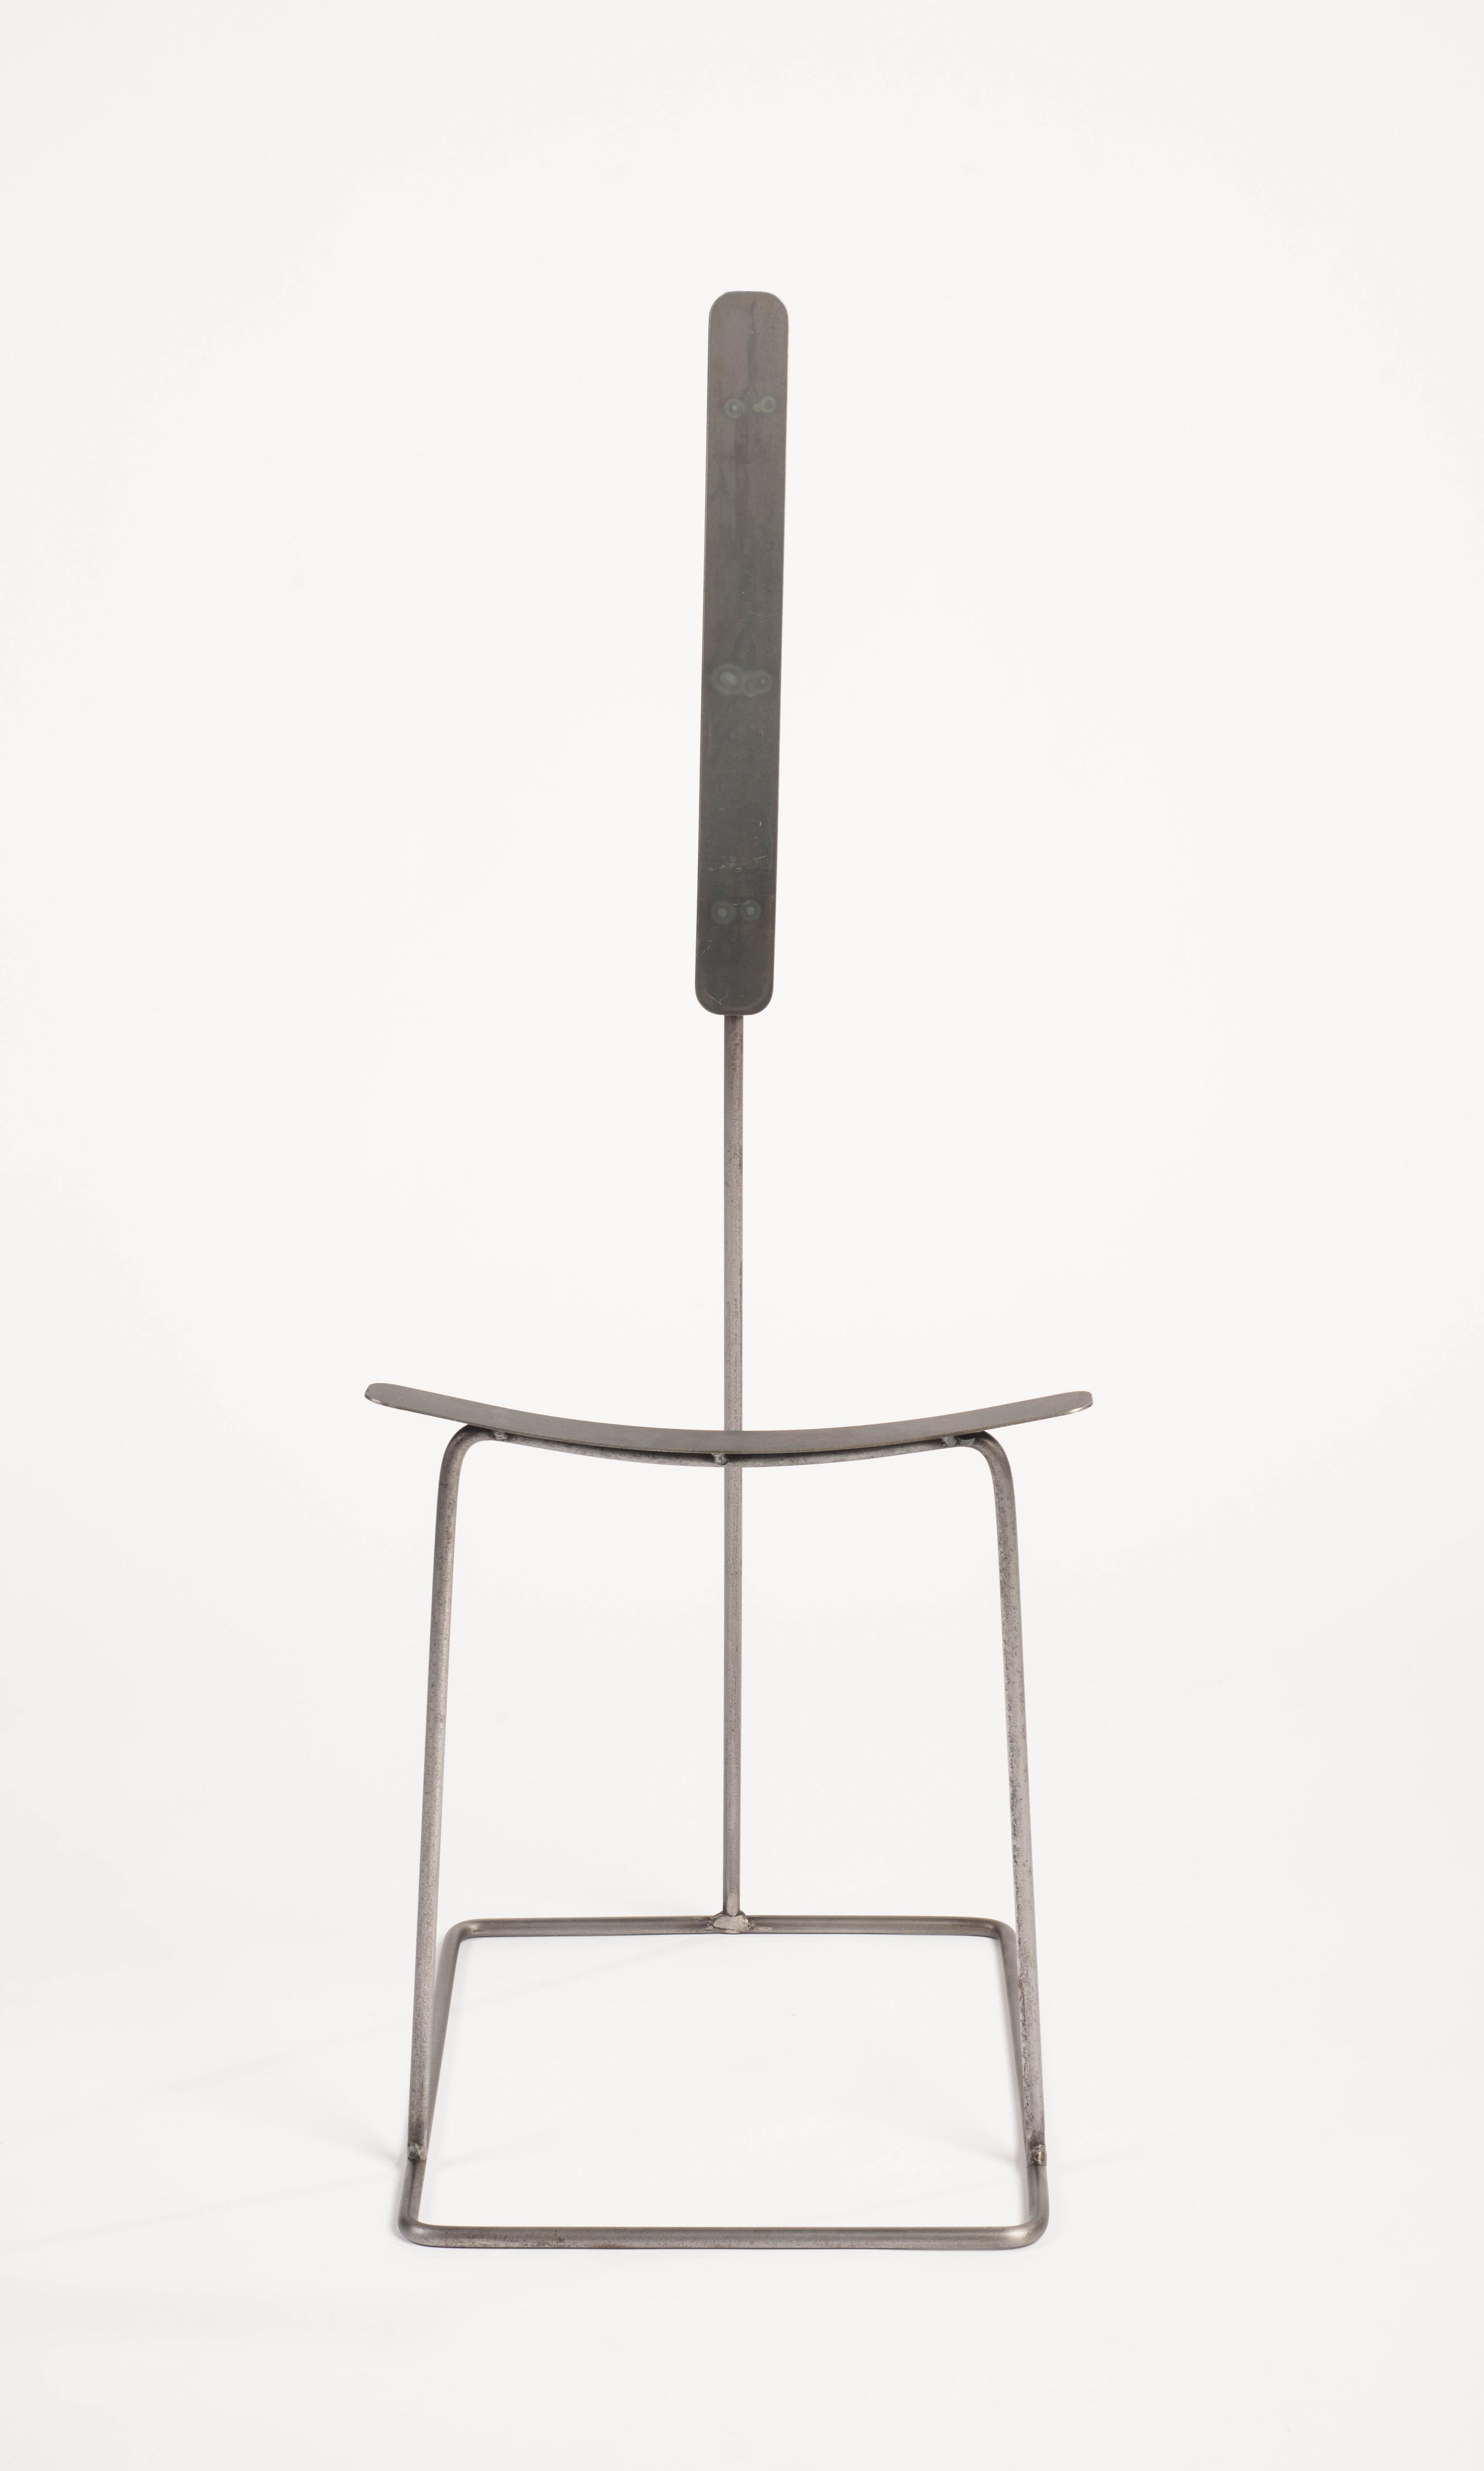 One note chair by Neil Nenner
Punctuation Marks
Dimensions: H 93 x L 40 x W 35 cm
Materials: Steel tubes and rods with a natural finish
 Corten sheets 
 
Neil Nenner (b.1977, Kibbutz Mevo Hama), Independent designer / Artist and lecture in